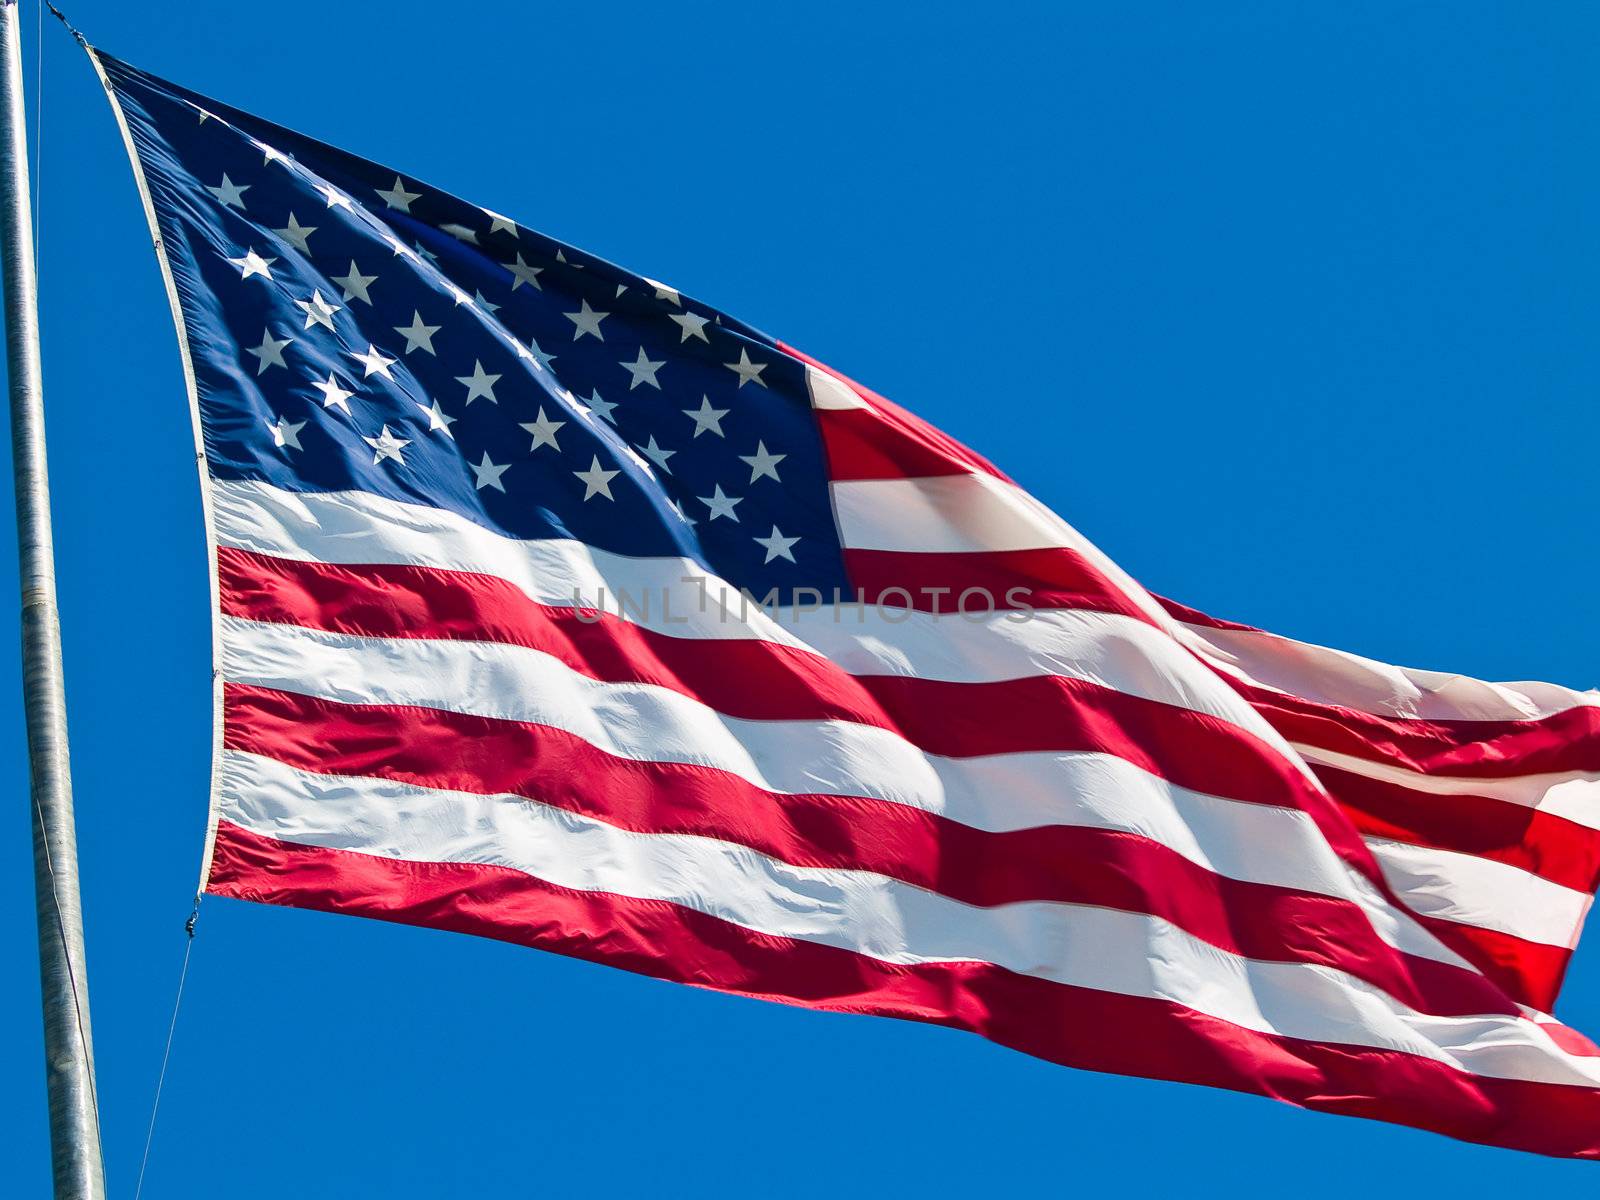 American Flag Waving Proudly on a Clear Windy Day